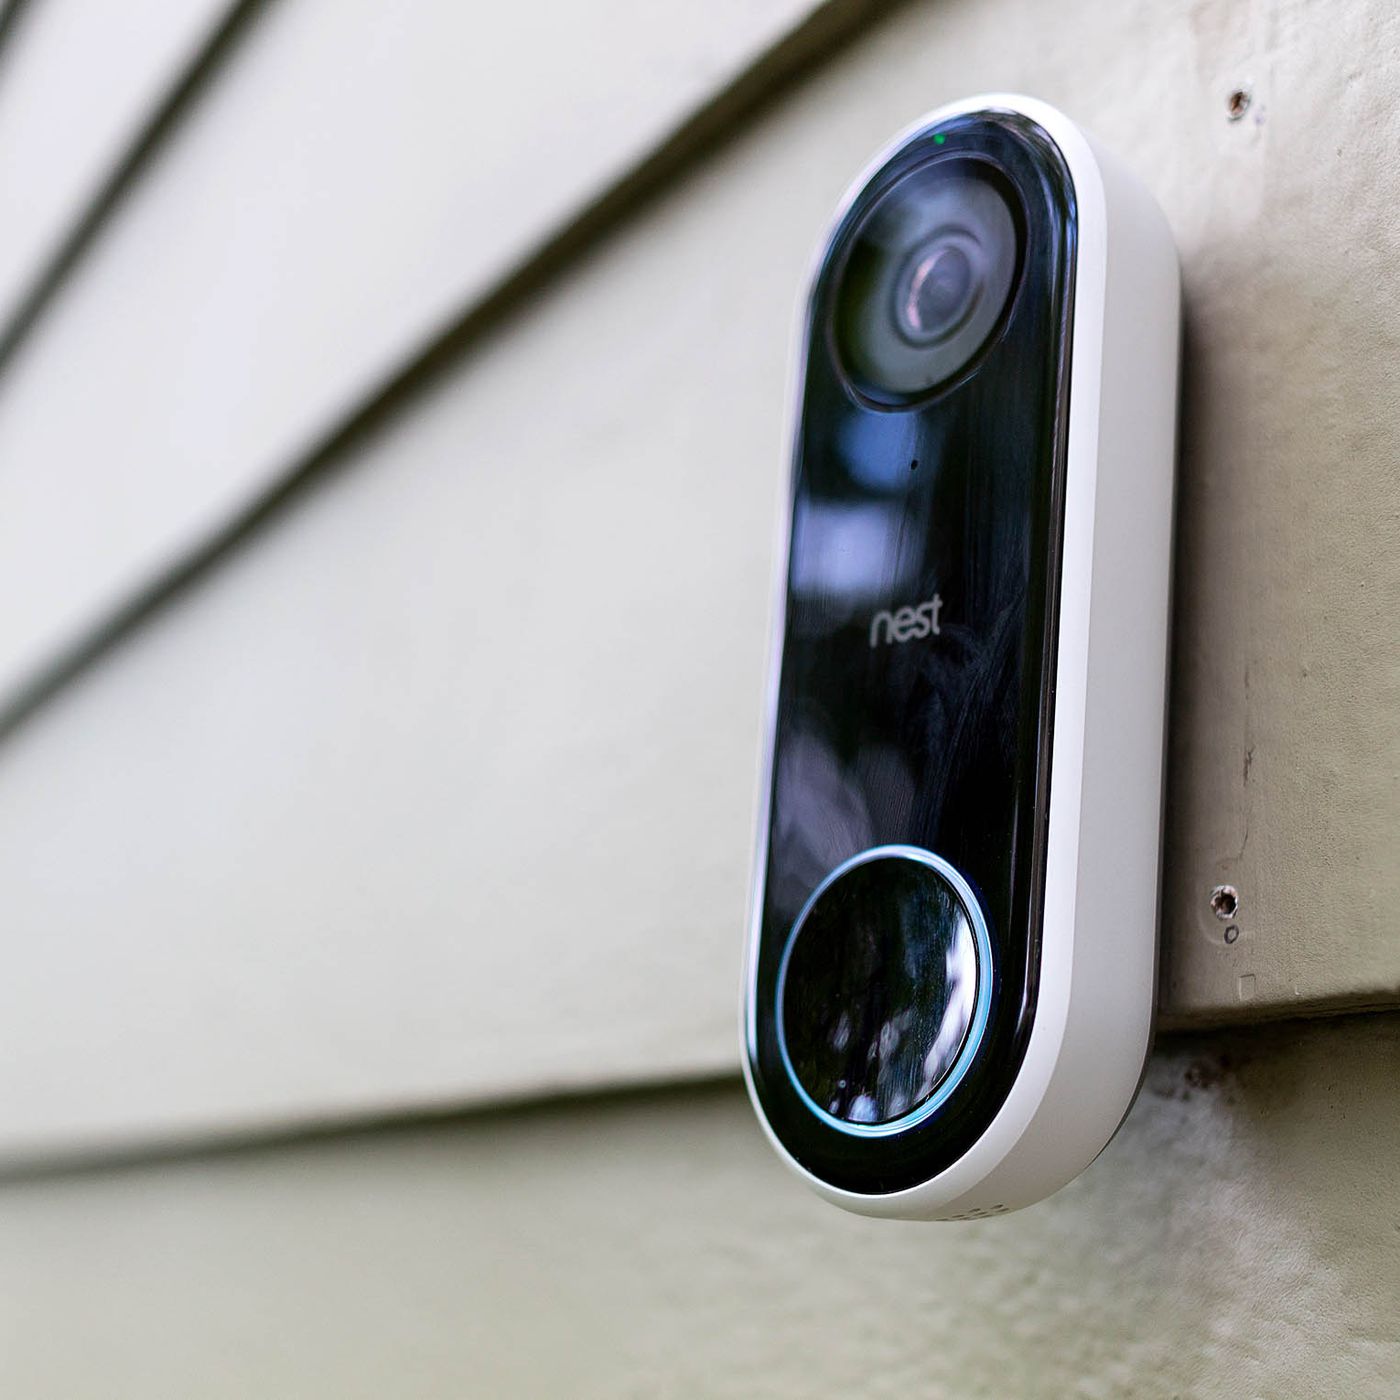 Nest Kick Start Your Smart Home With 2021’s Must-Have Home Automation Devices